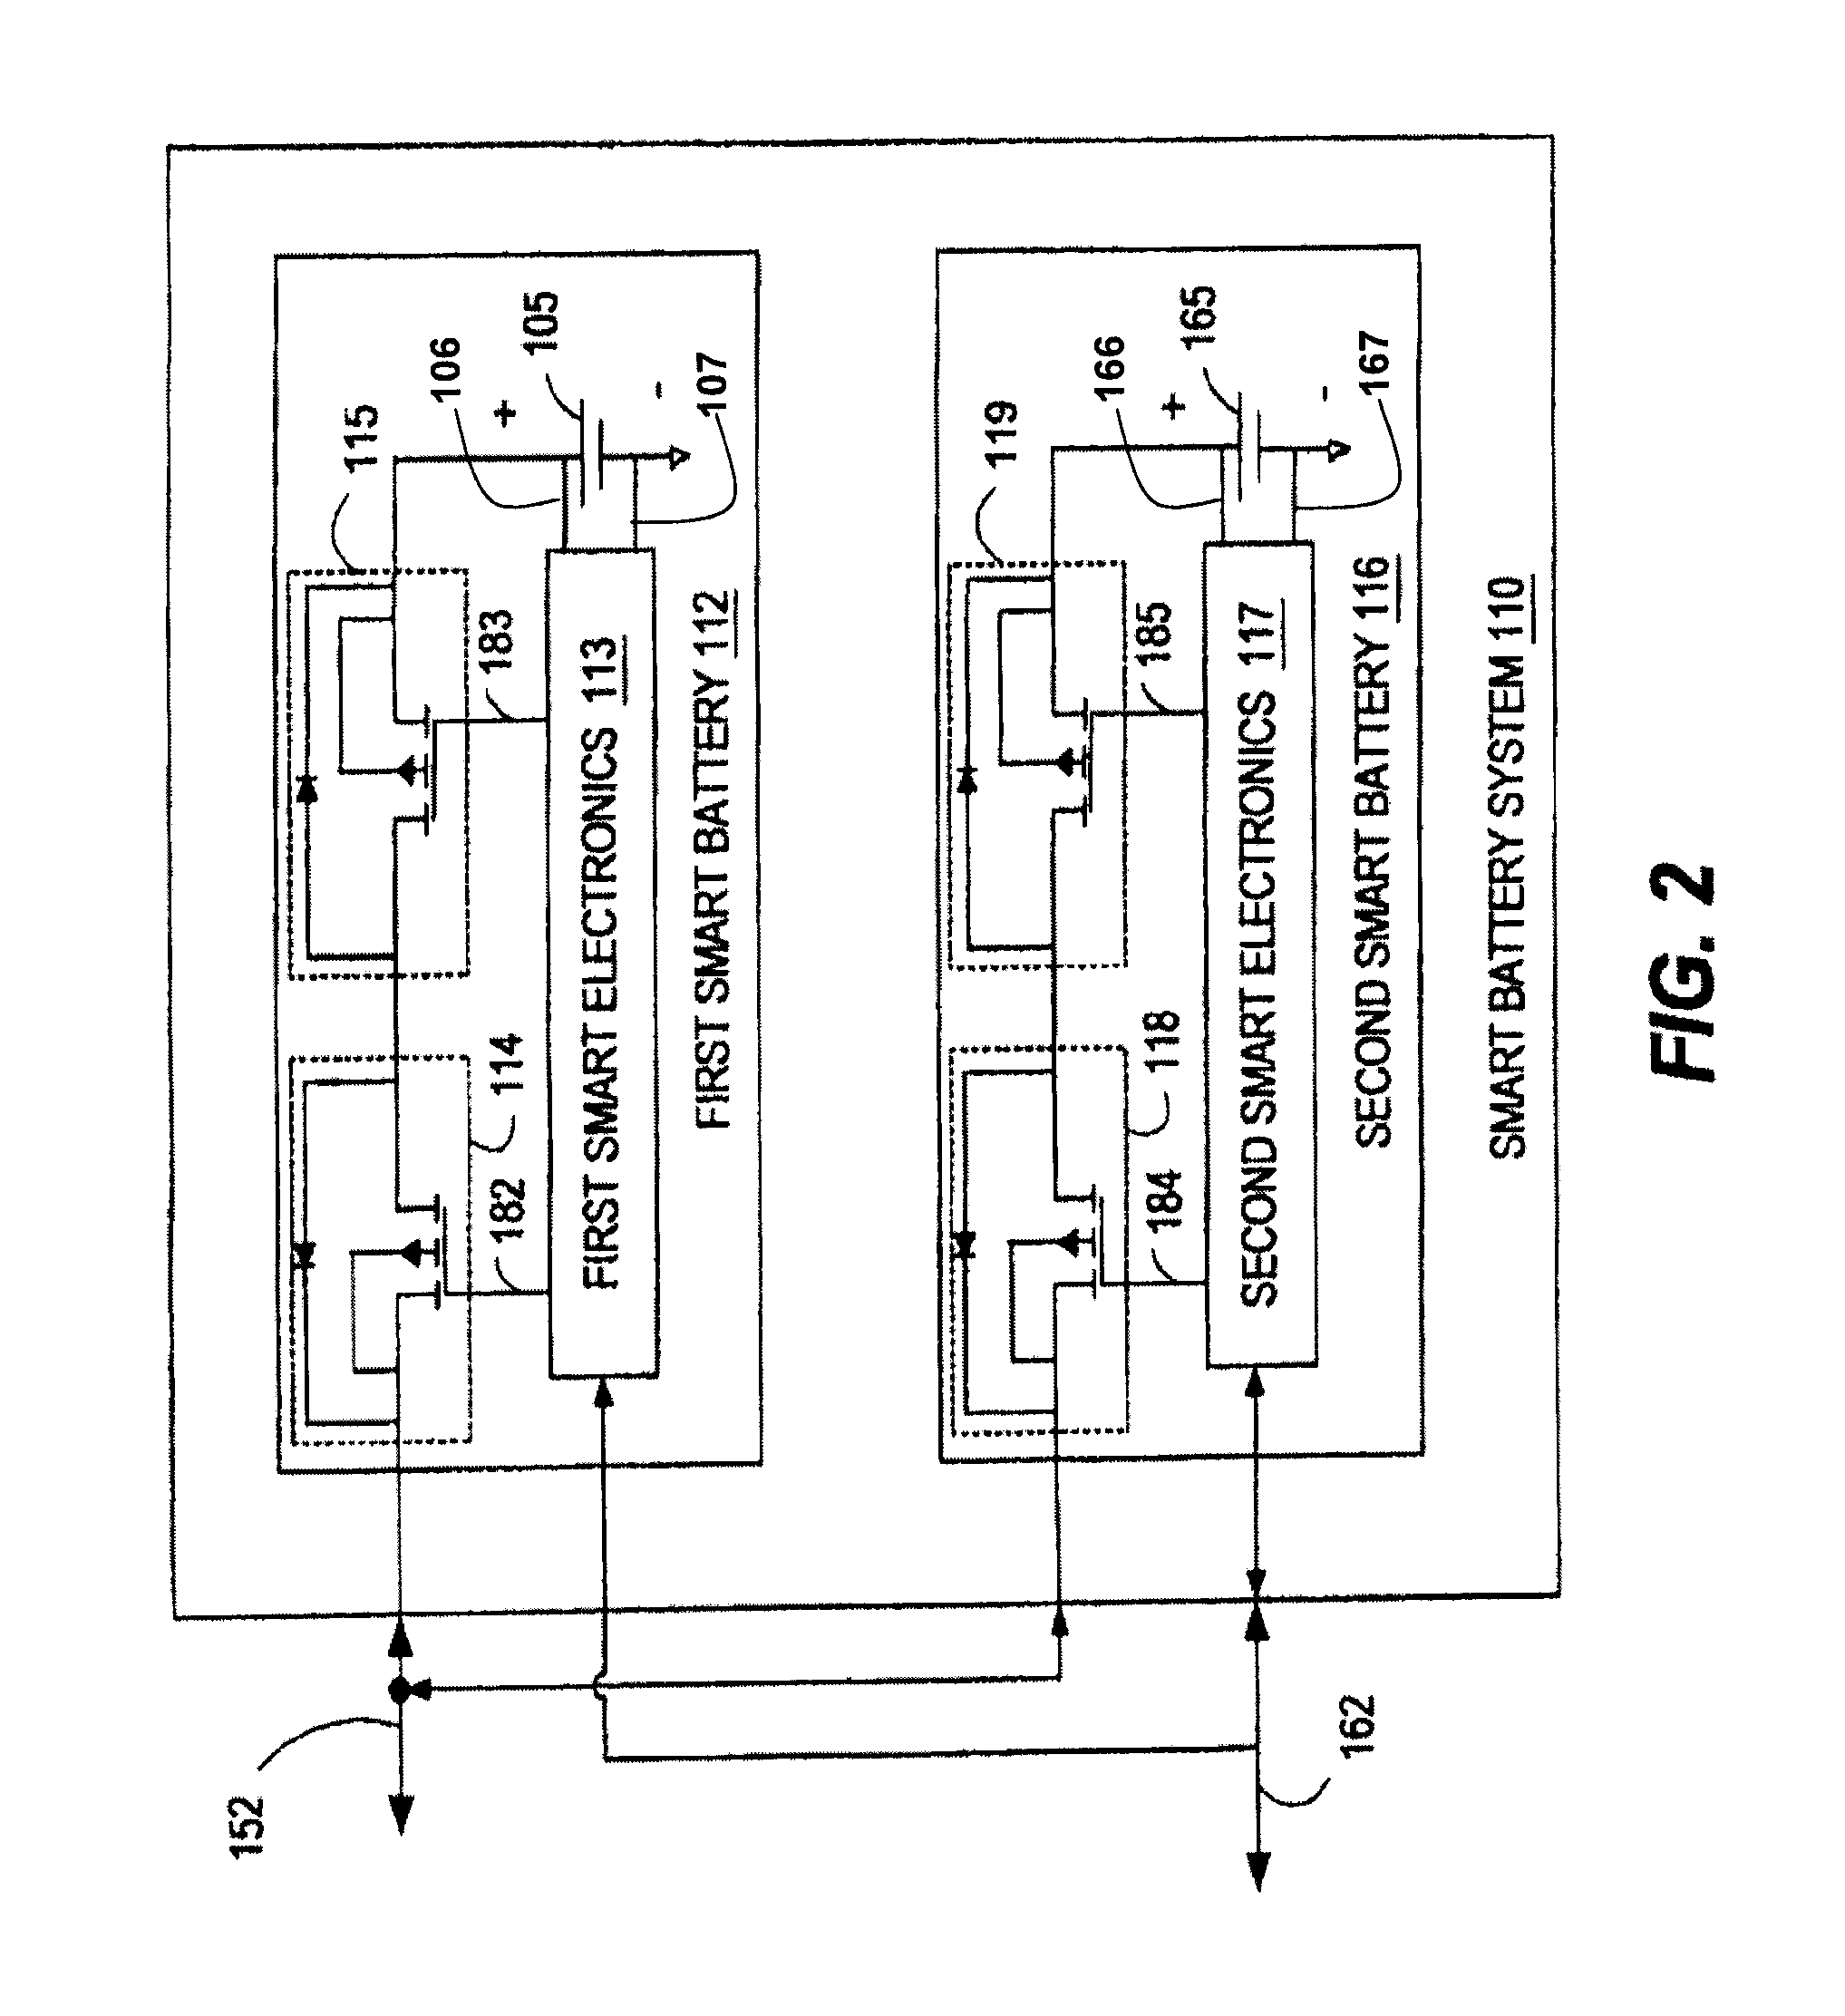 Battery and system power selector integration scheme